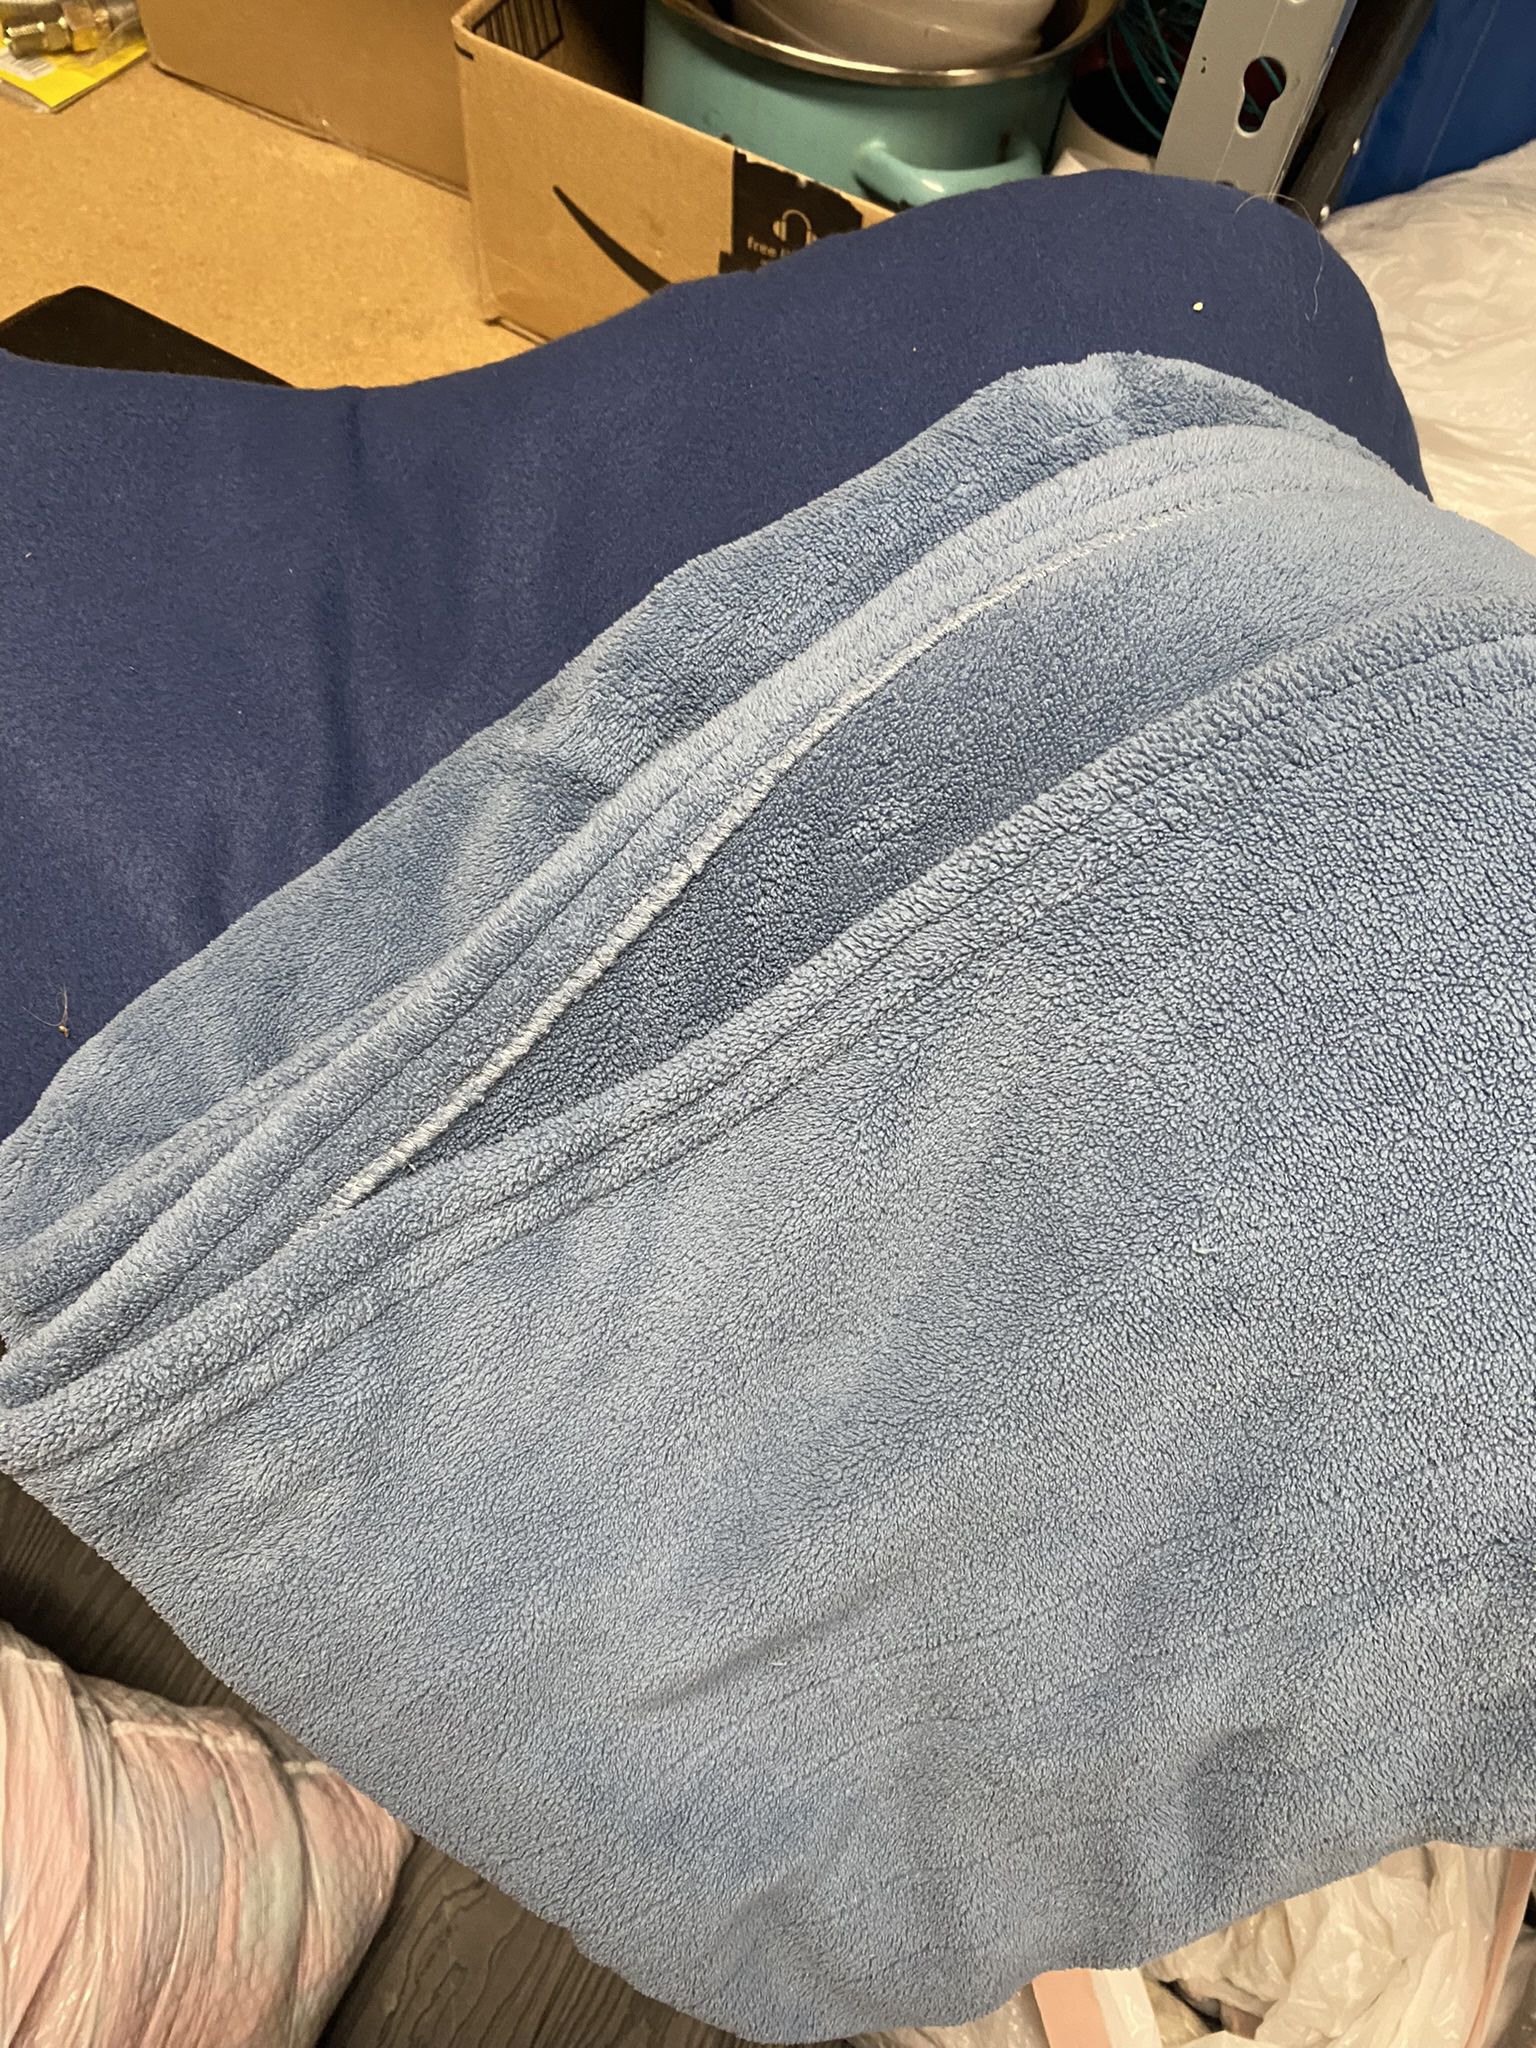 2 Twin Electric Blankets ( Cords Missing )